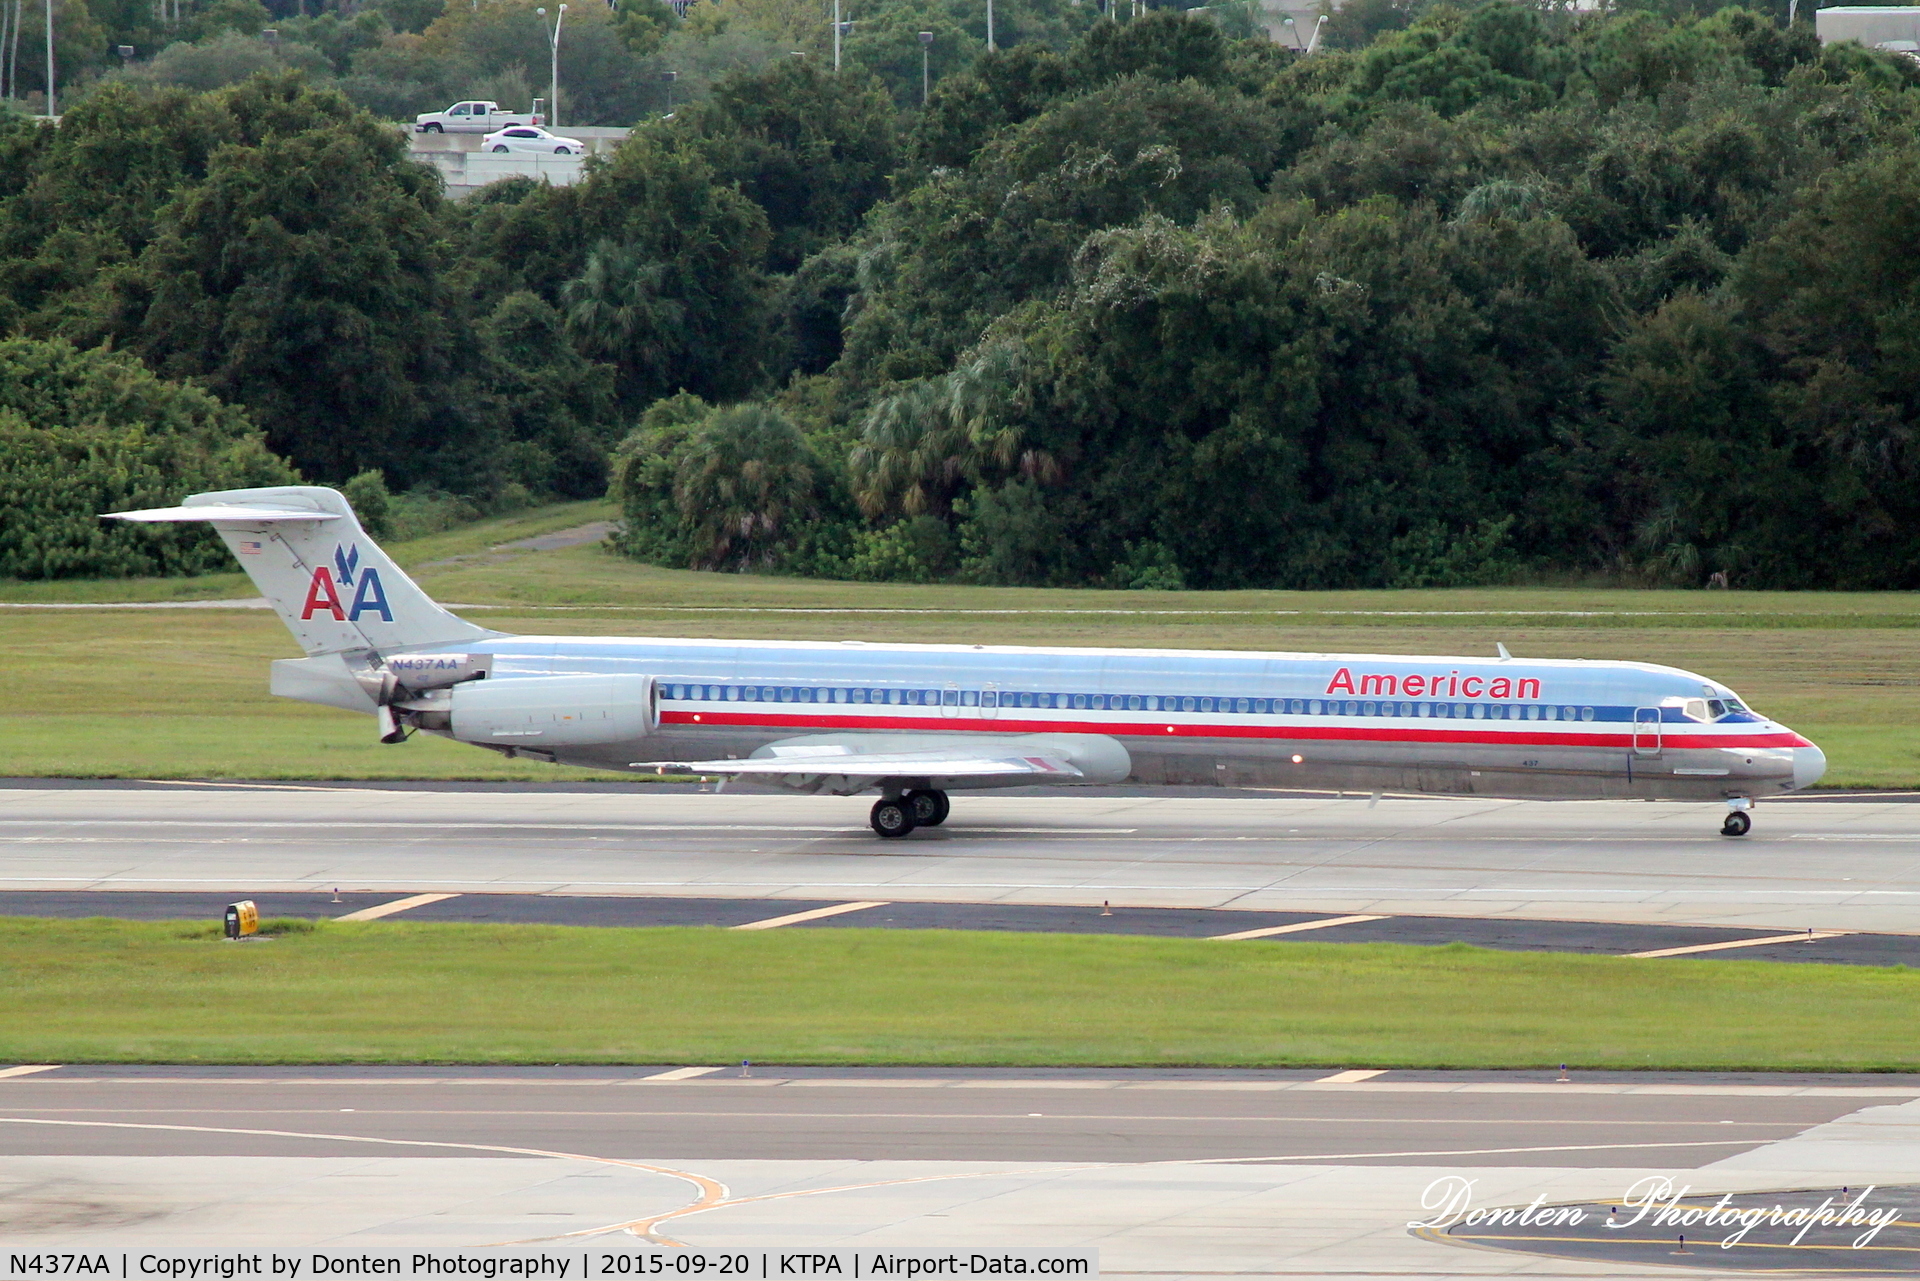 N437AA, 1987 McDonnell Douglas MD-83 (DC-9-83) C/N 49455, American Flight 1198 (437AA) arrives at Tampa International Airport following flight from Dallas-Fort Worth International Airport